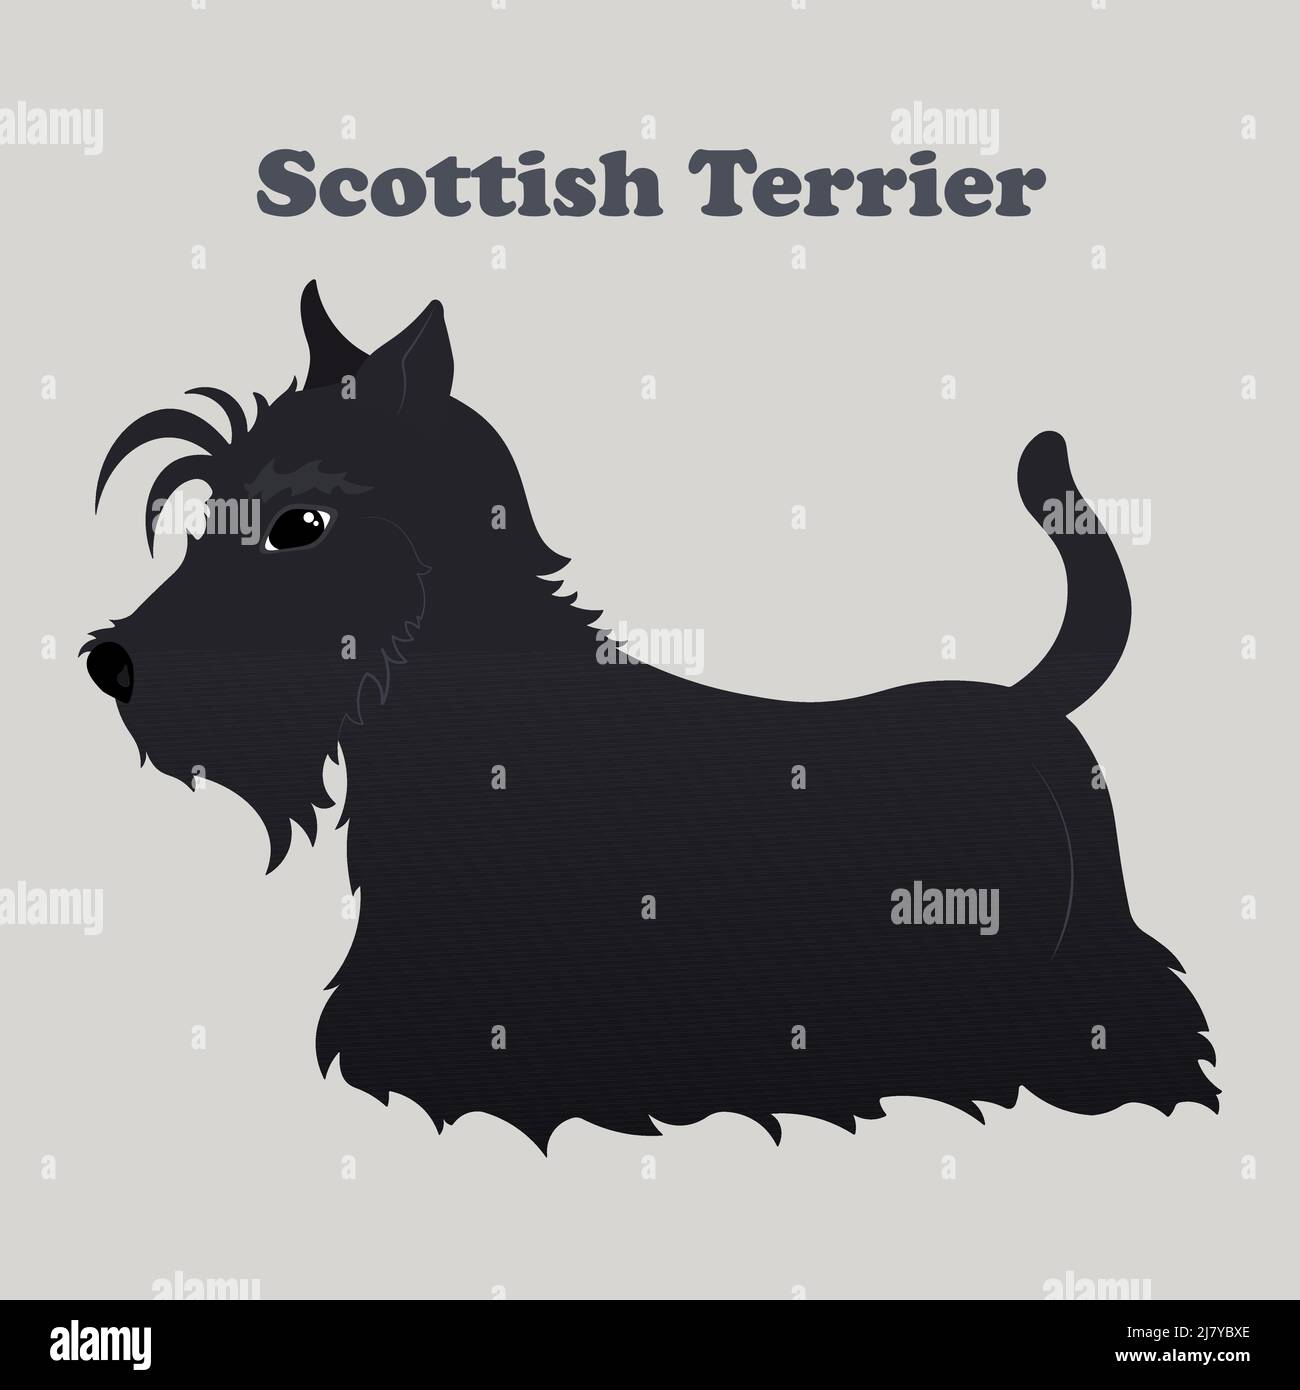 Scottish terrier. Print with dog with background. Stock Vector